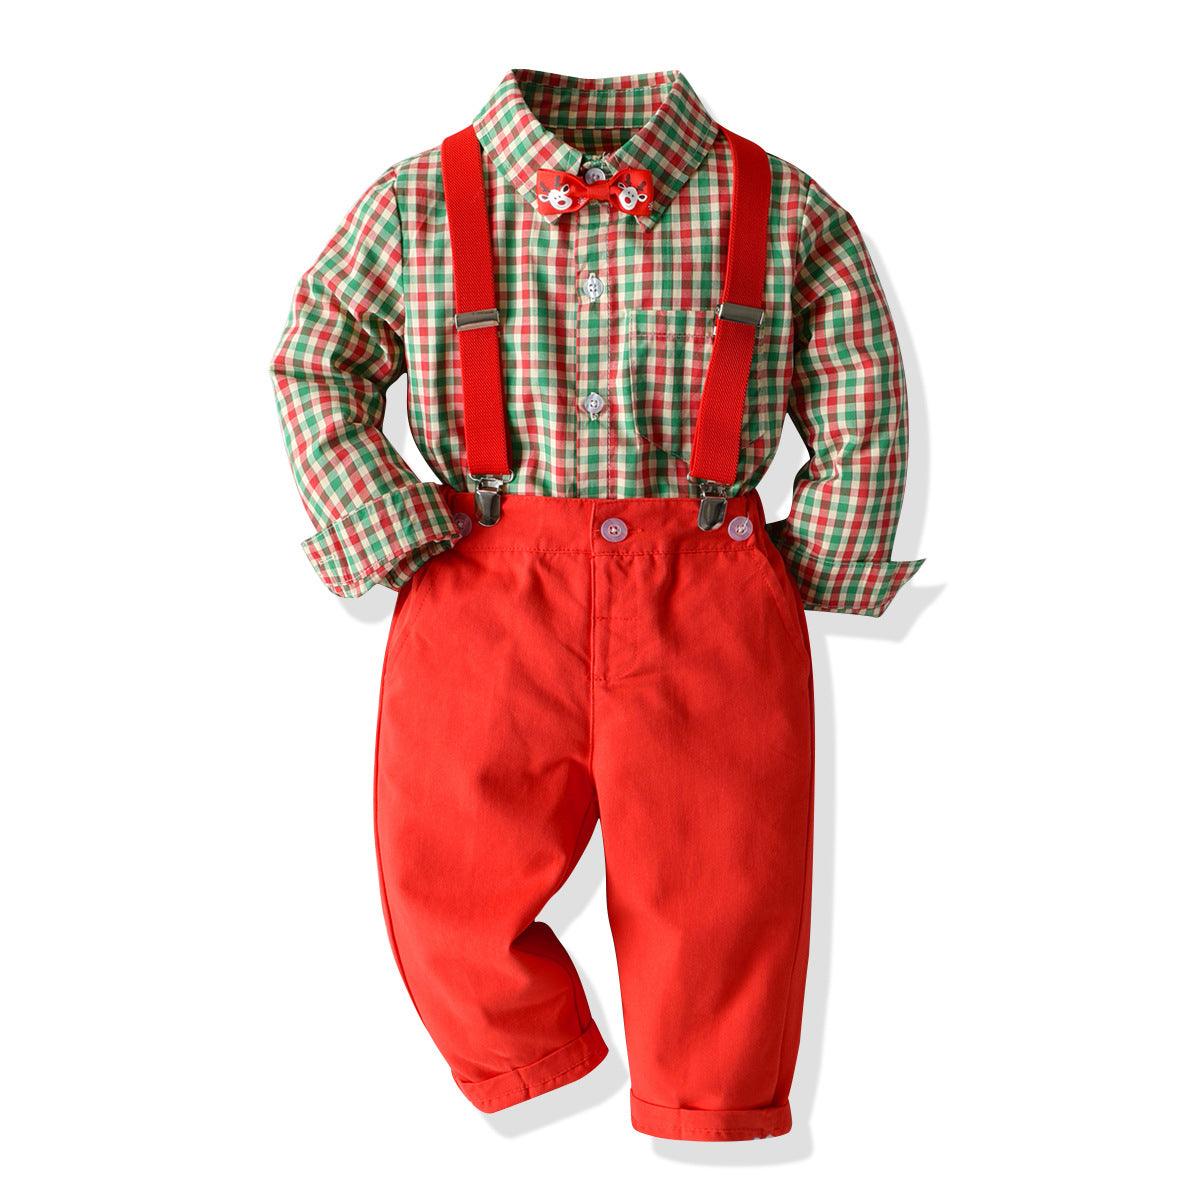 Boys' Plaid Shirt Bow Tie Overalls Party Dress - TOYCENT 